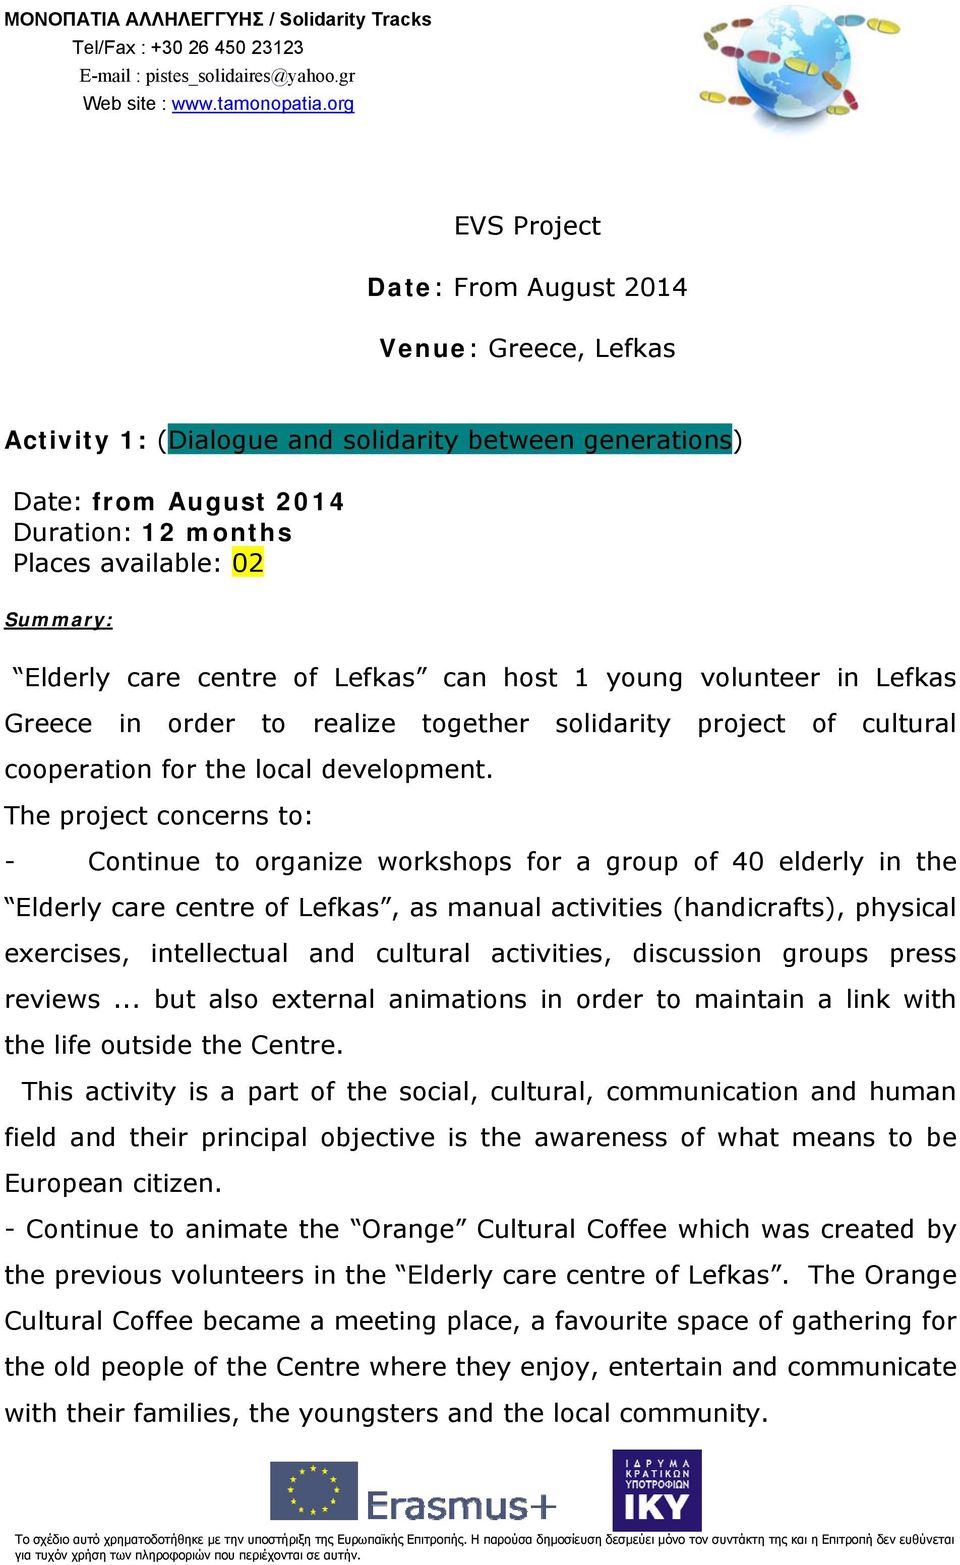 1 young volunteer in Lefkas Greece in order to realize together solidarity project of cultural cooperation for the local development.